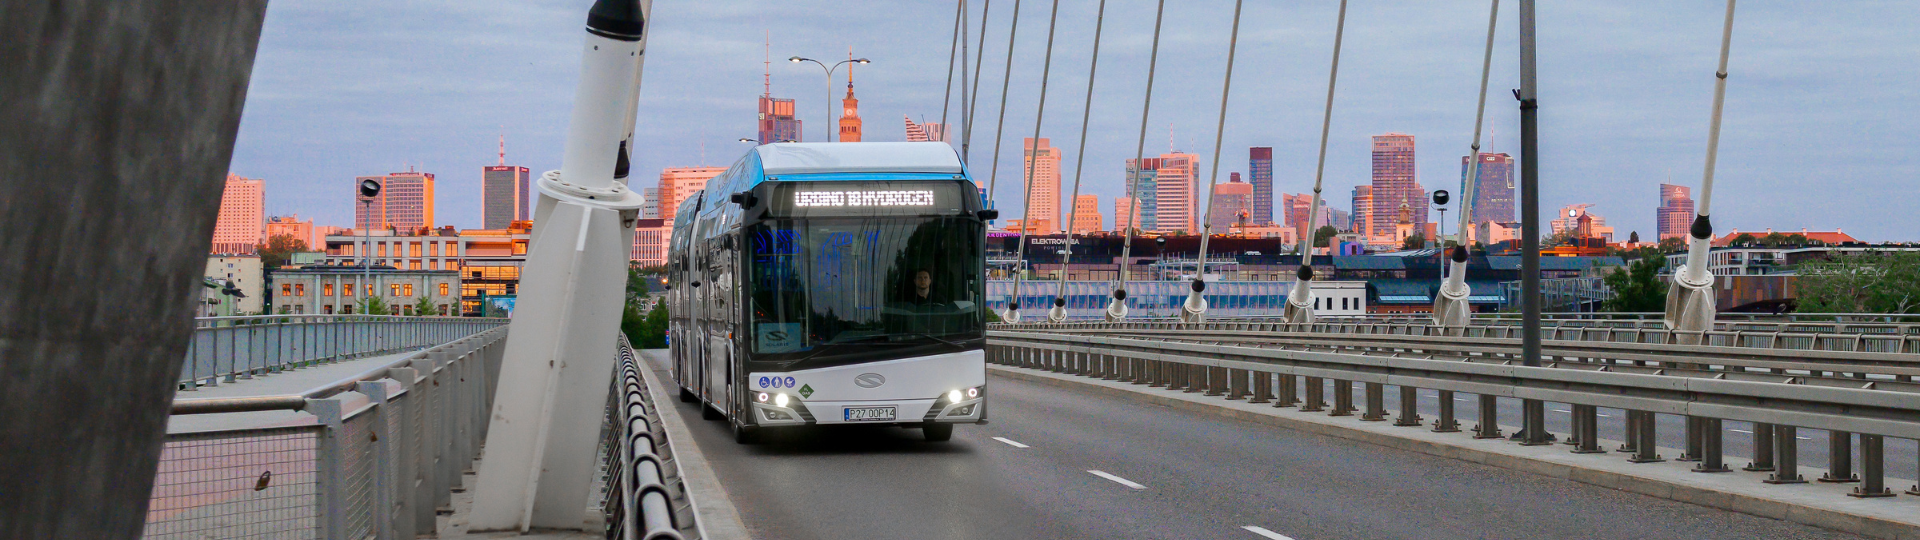 First order for articulated Solaris hydrogen buses from Aschaffenburg